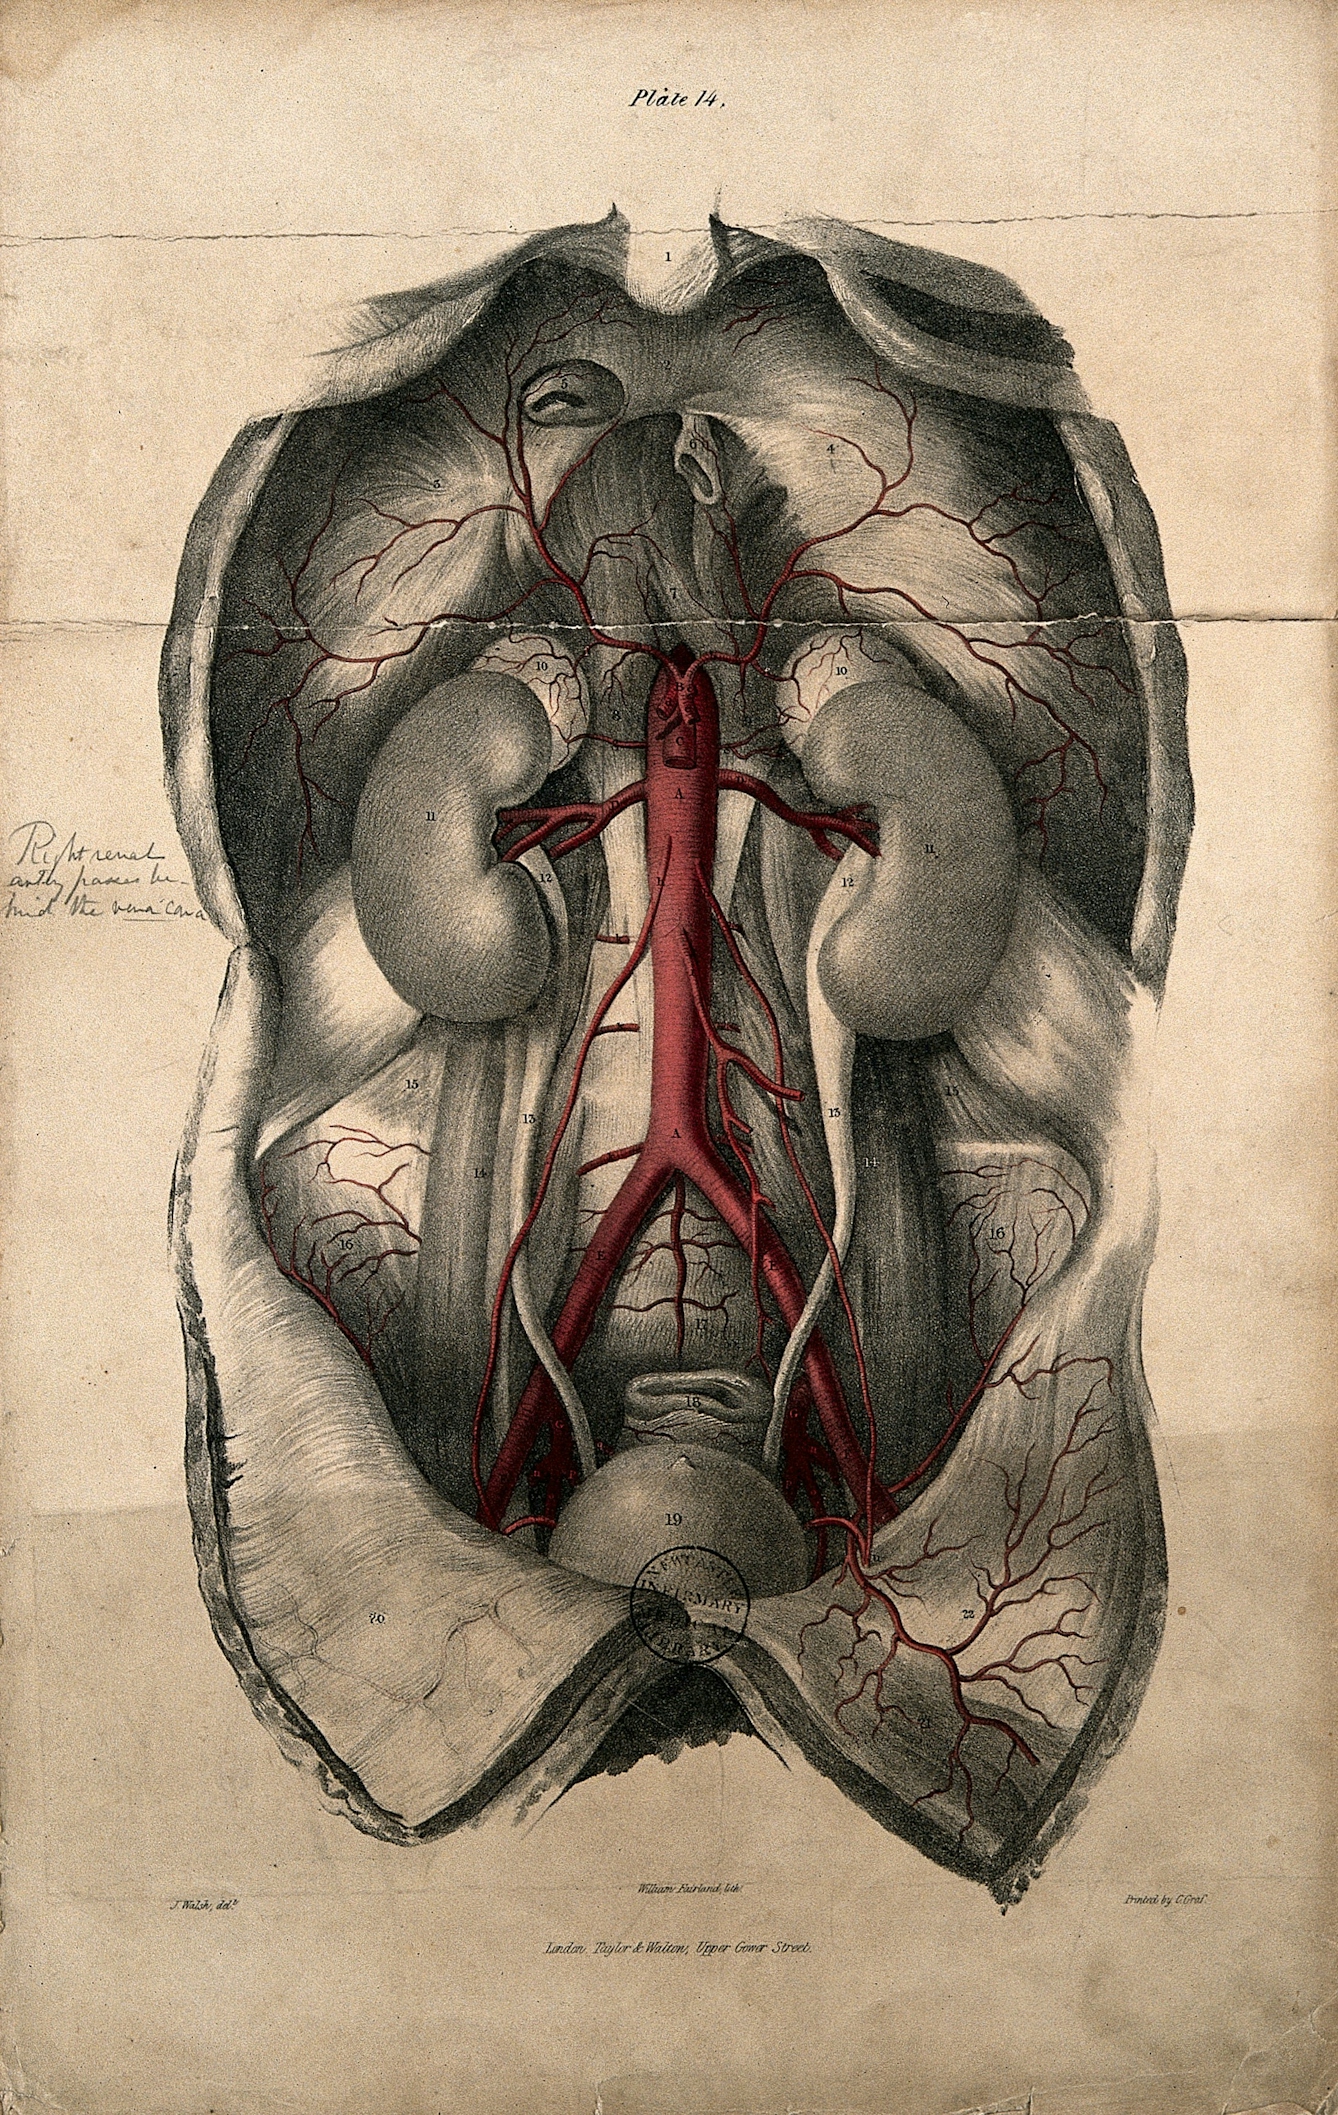 Lithograph showing a cut-open abdomen with the aorta coloured red.